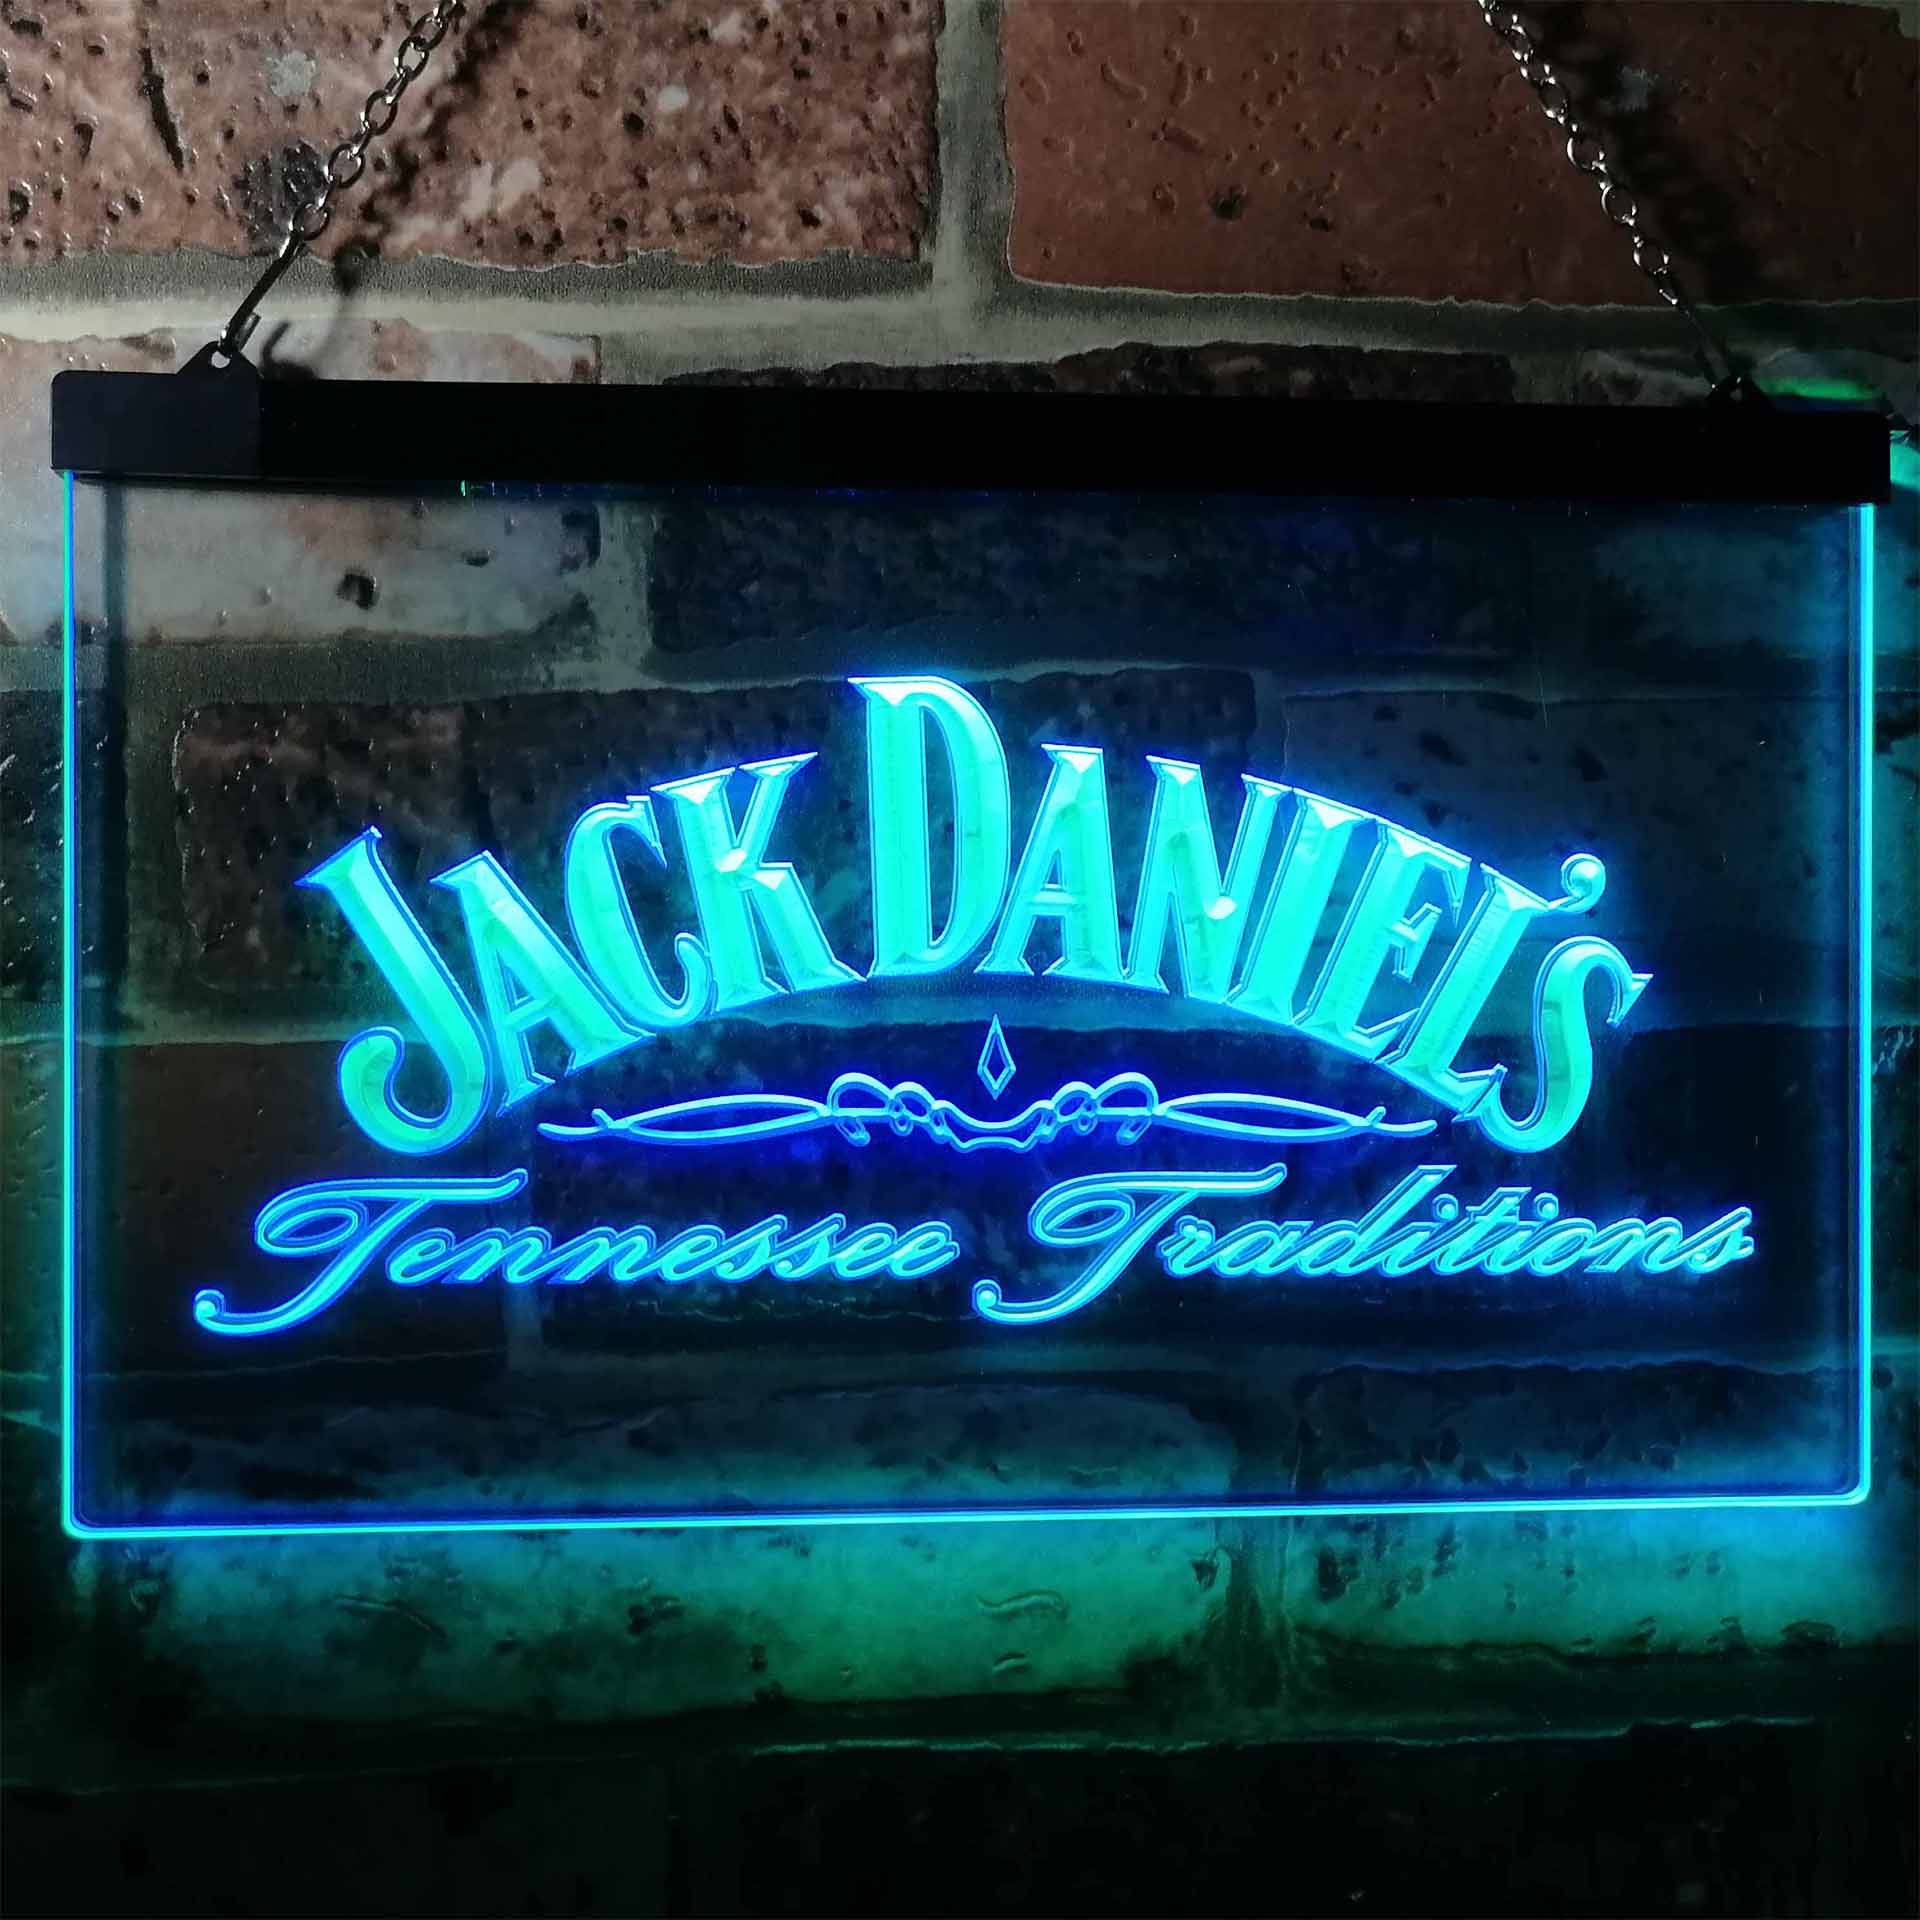 Jack Daniel's Tennessee Traditions LED Neon Sign